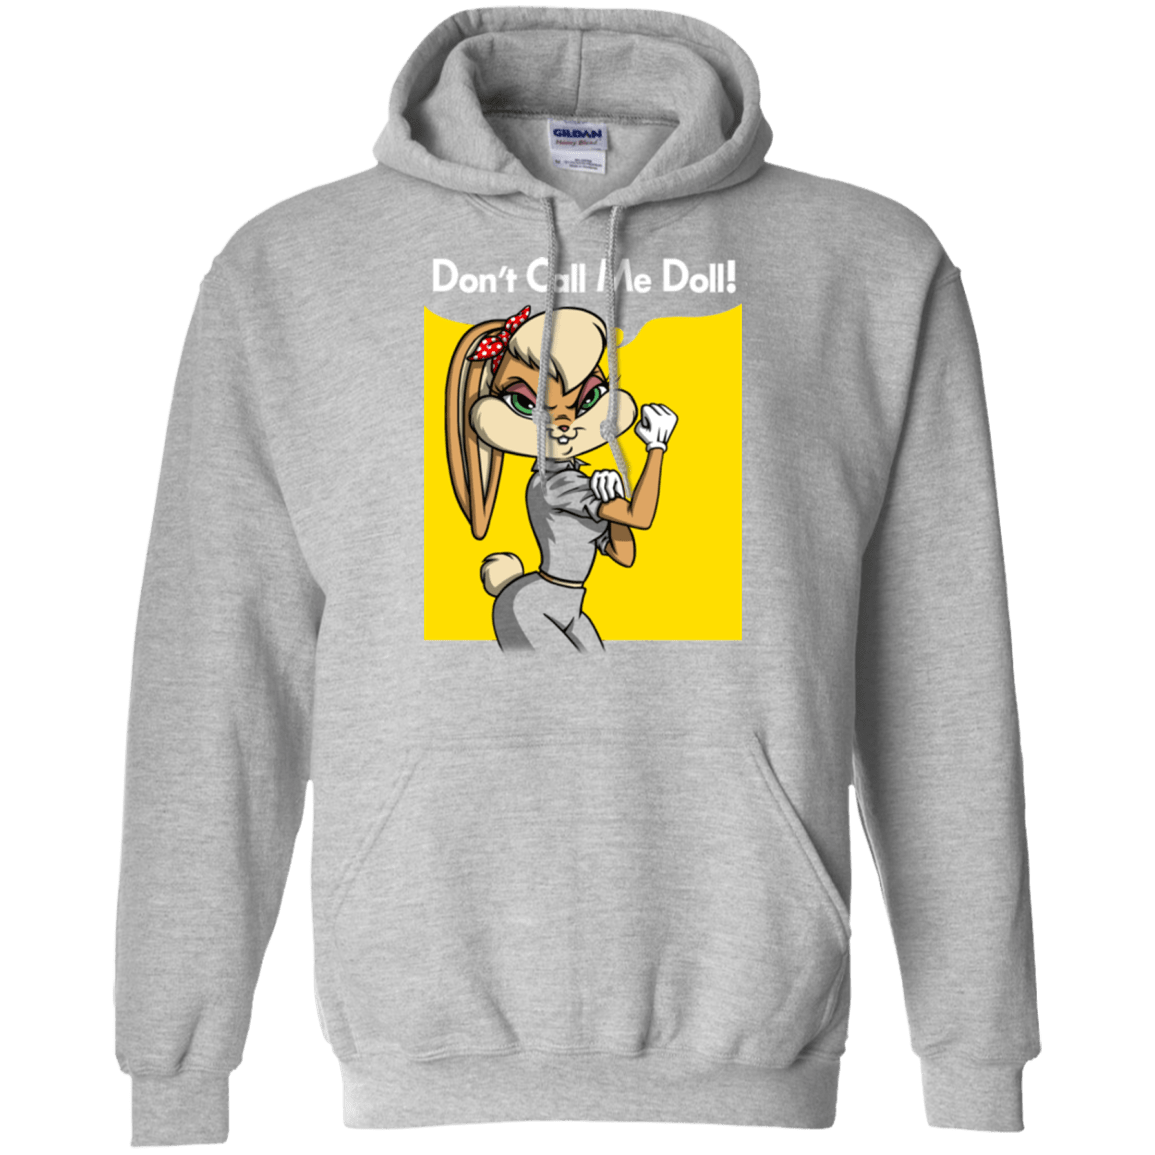 Sweatshirts Sport Grey / S Lola Dont Call me Doll Pullover Hoodie